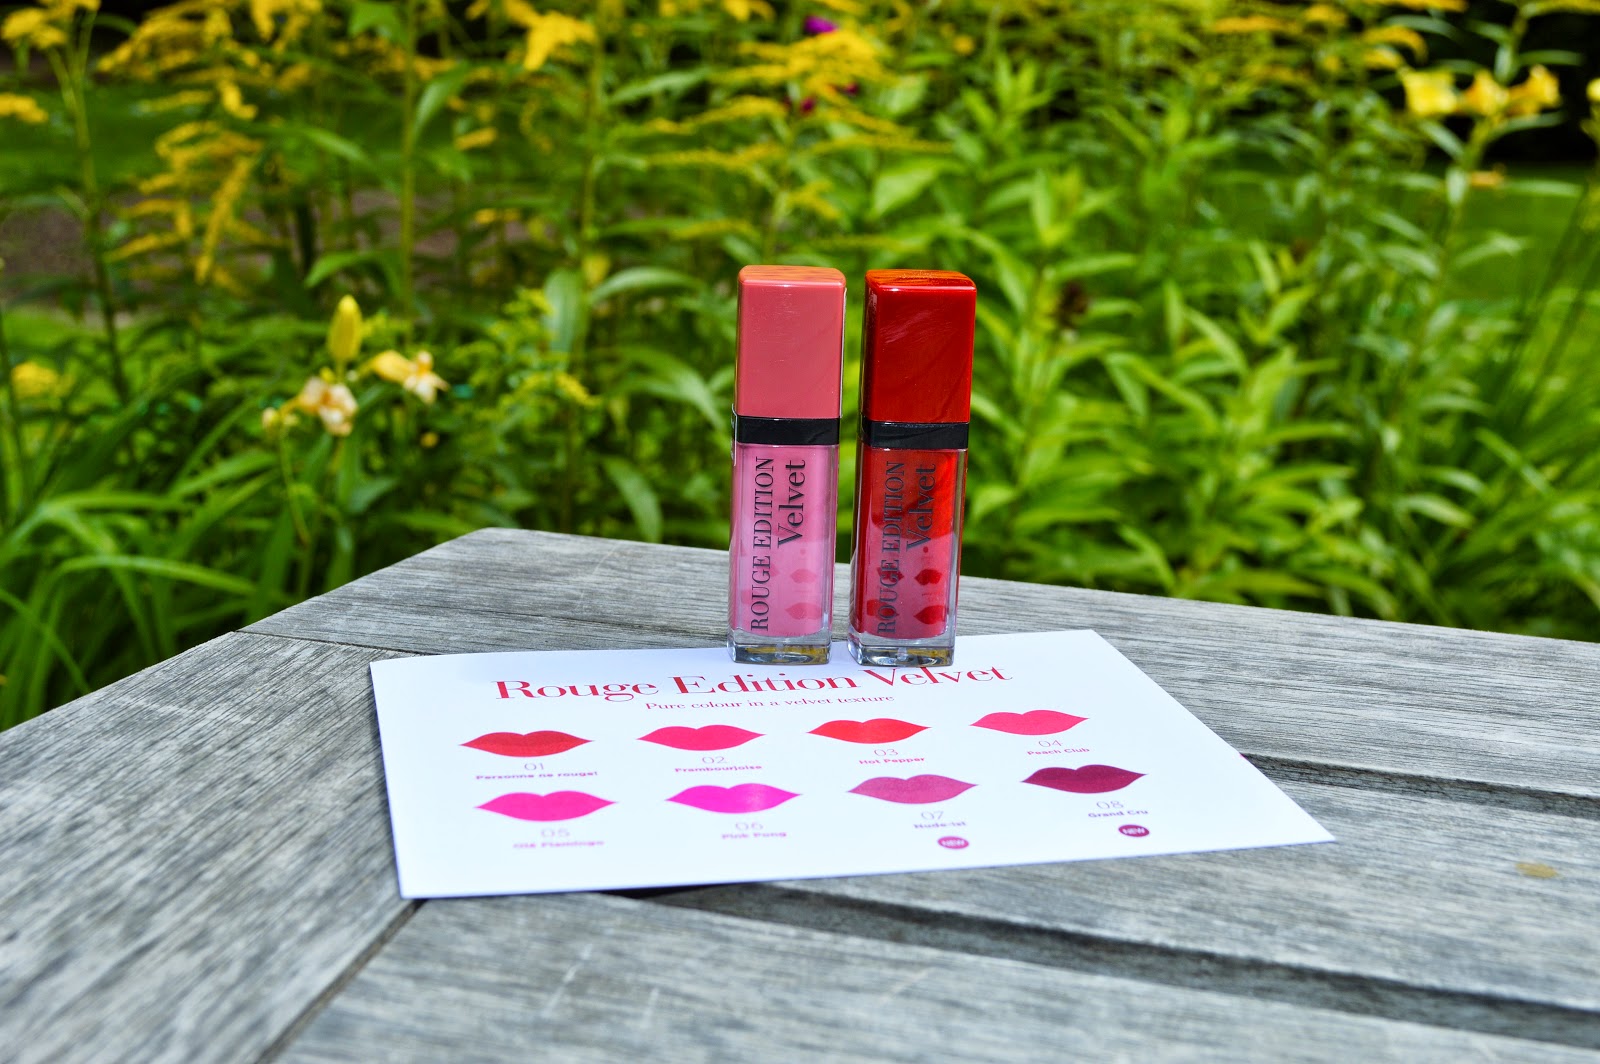 Bourjois Rouge Edition Velvet in 07 Nude-ist and 08 Grand Cru Review